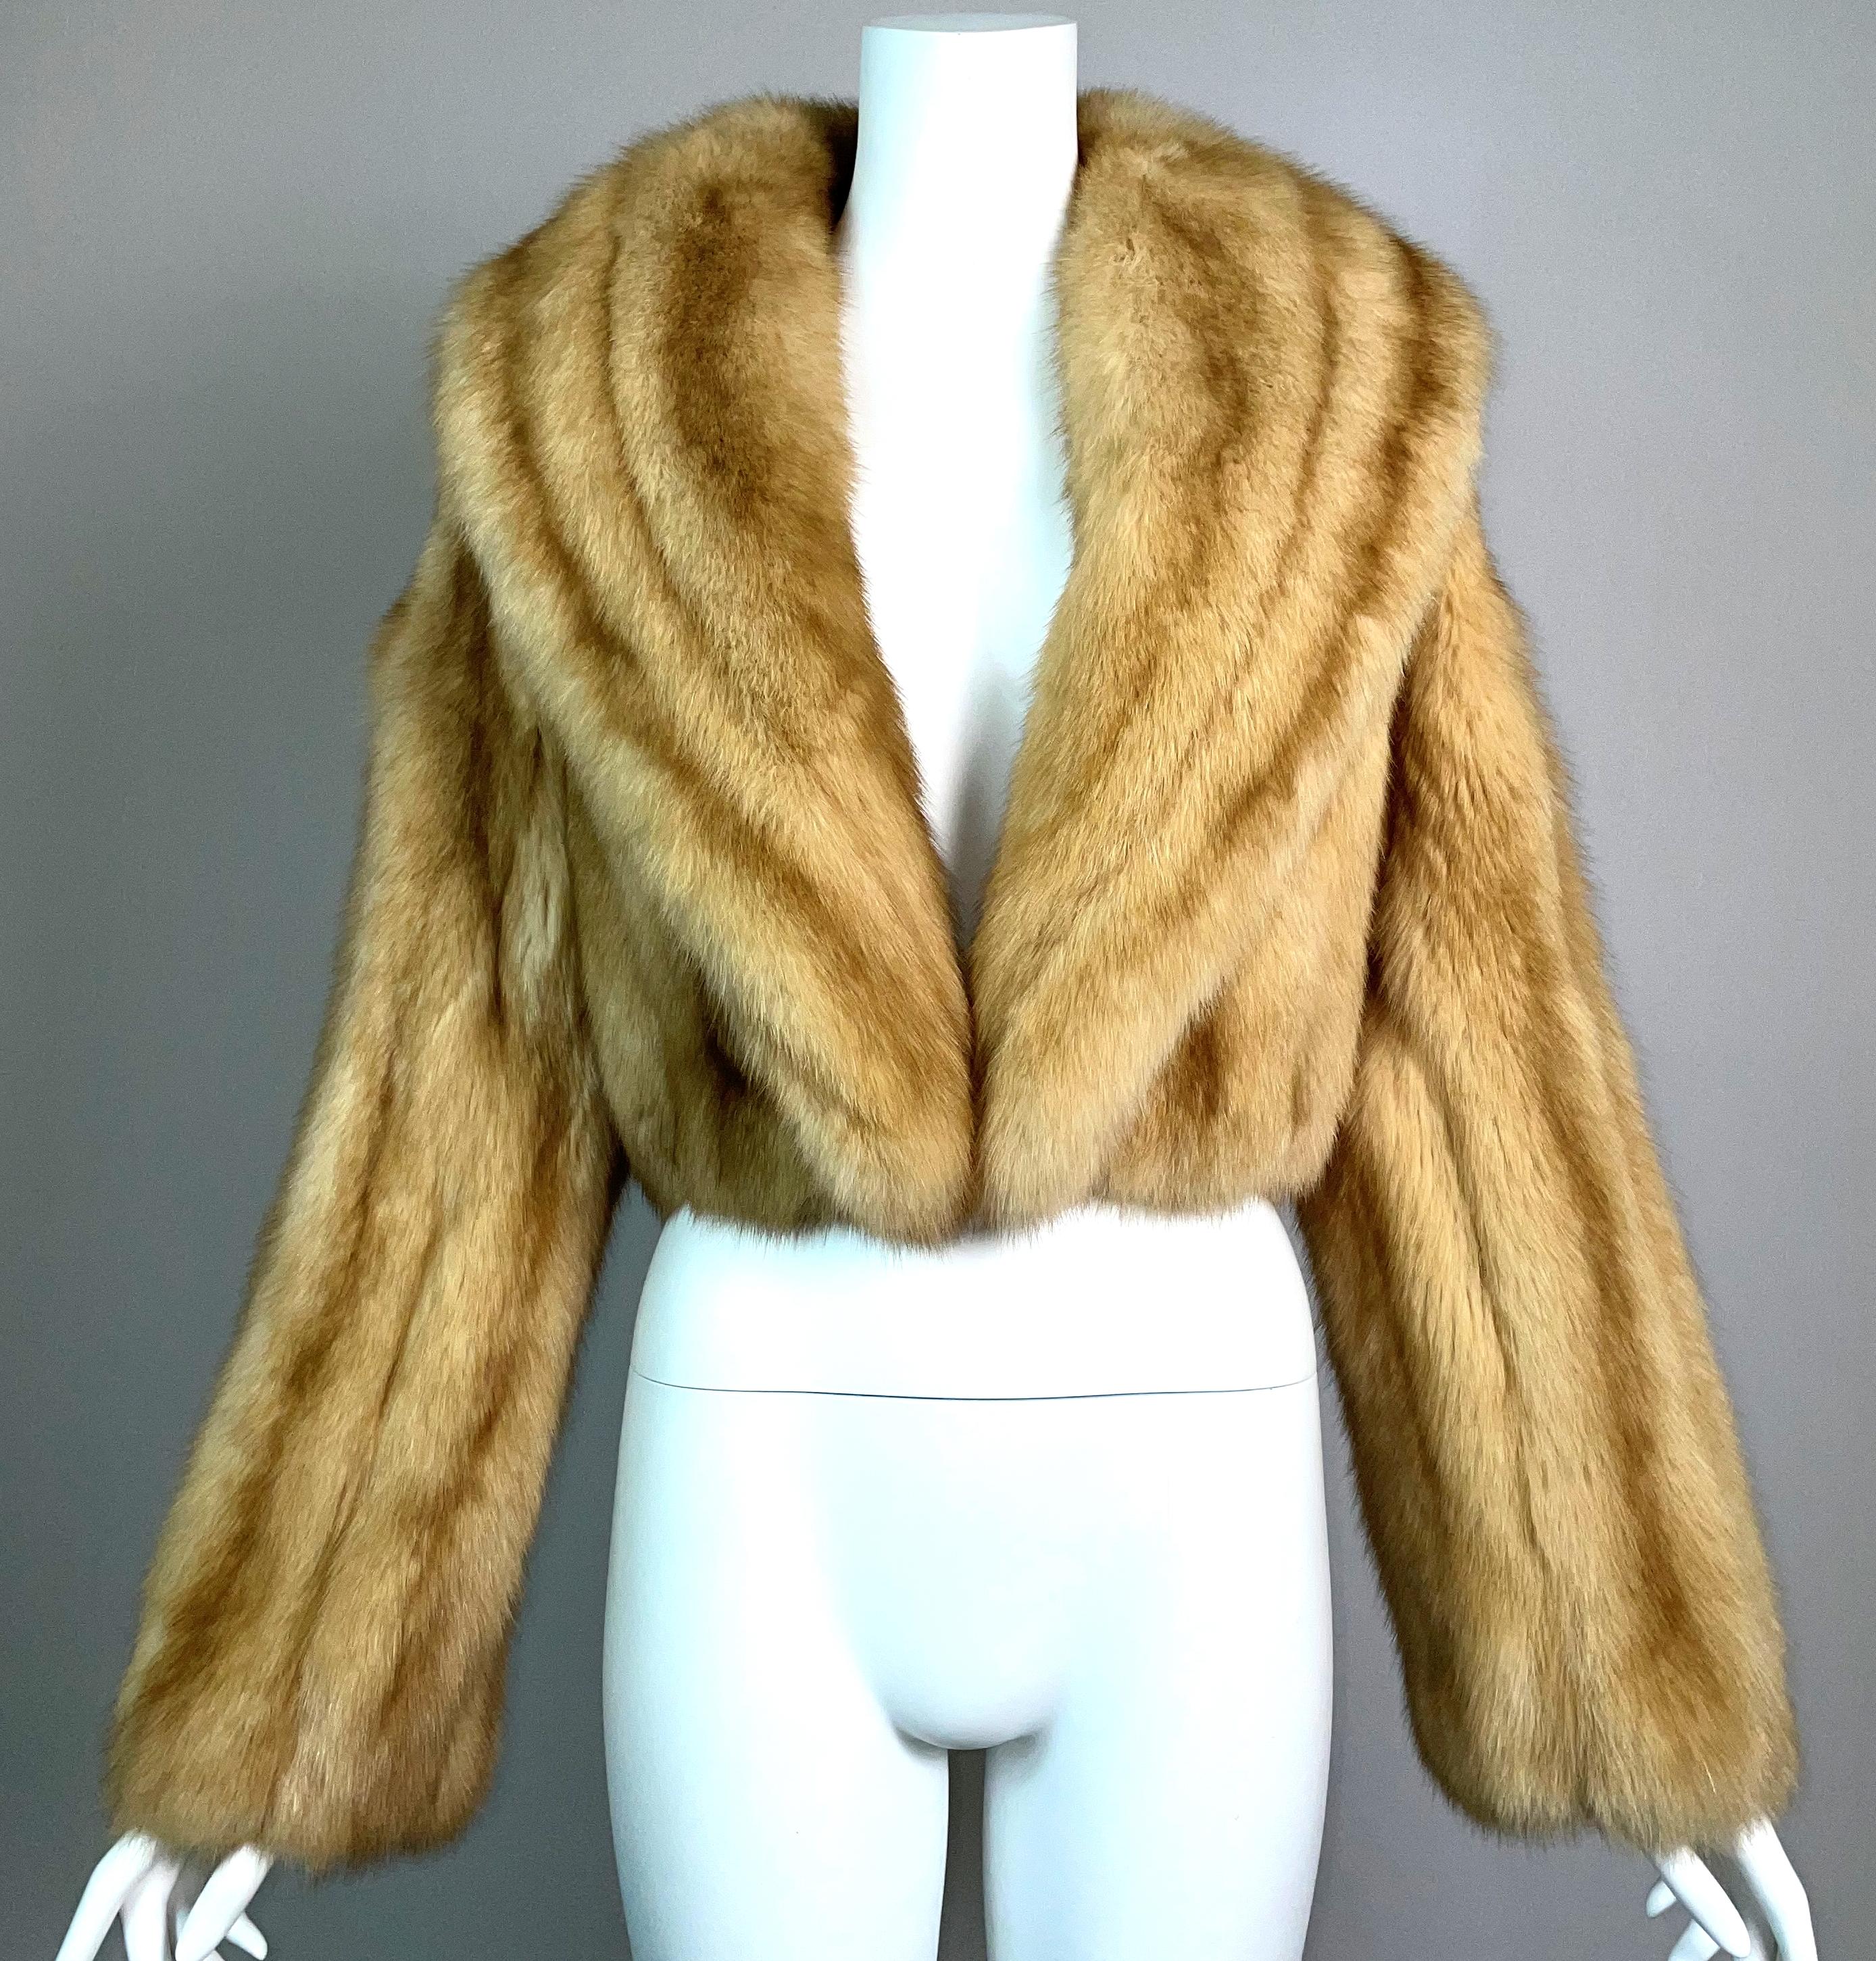 **THANK YOU FOR SHOPPING WITH MES DEUX FILLES**

DESIGNER: 1990's Louis Feraud
CONDITION: Excellent
FABRIC: There is no tag- appears to be sable fur but not sure- the jacket is made in Canada so it may be Canadian Sable
COUNTRY MADE: Canada
SIZE: No